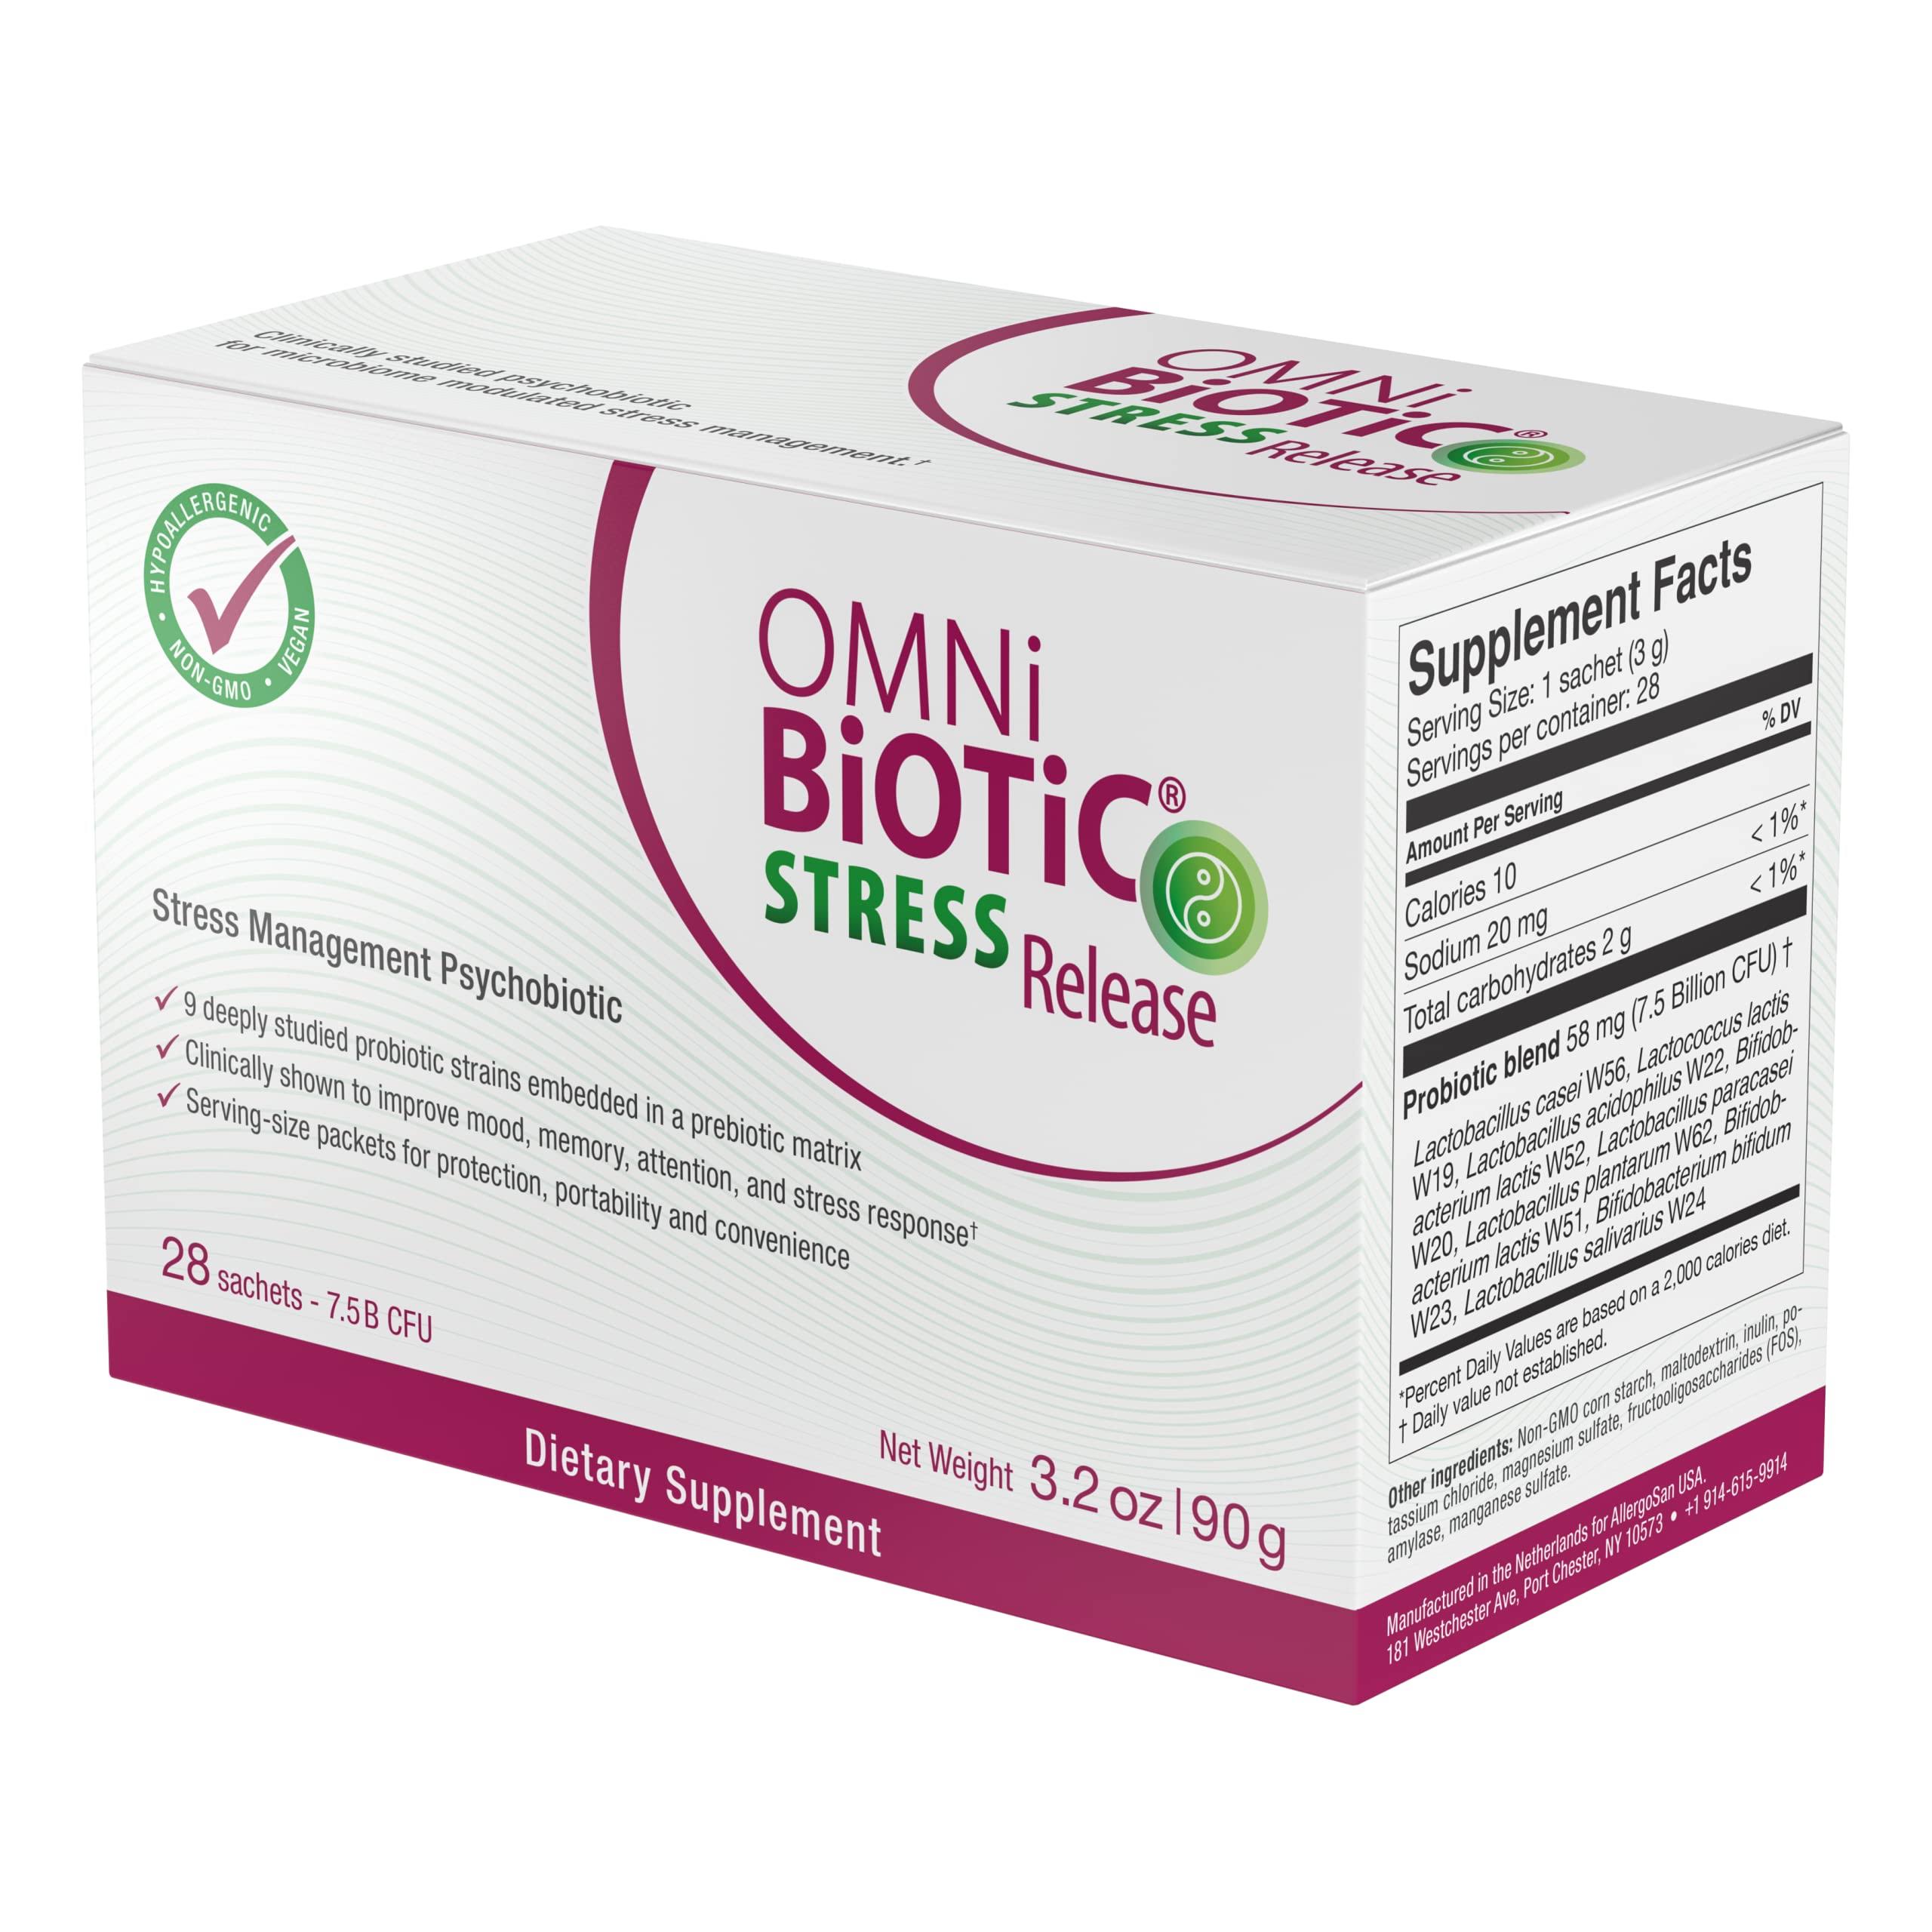 OMNI BIOTIC Stress Release - Clinically Tested Probiotic For Stress Management & Gut-Brain Axis Support - Stress Probiotic And Mood Probiotic - Vegan,